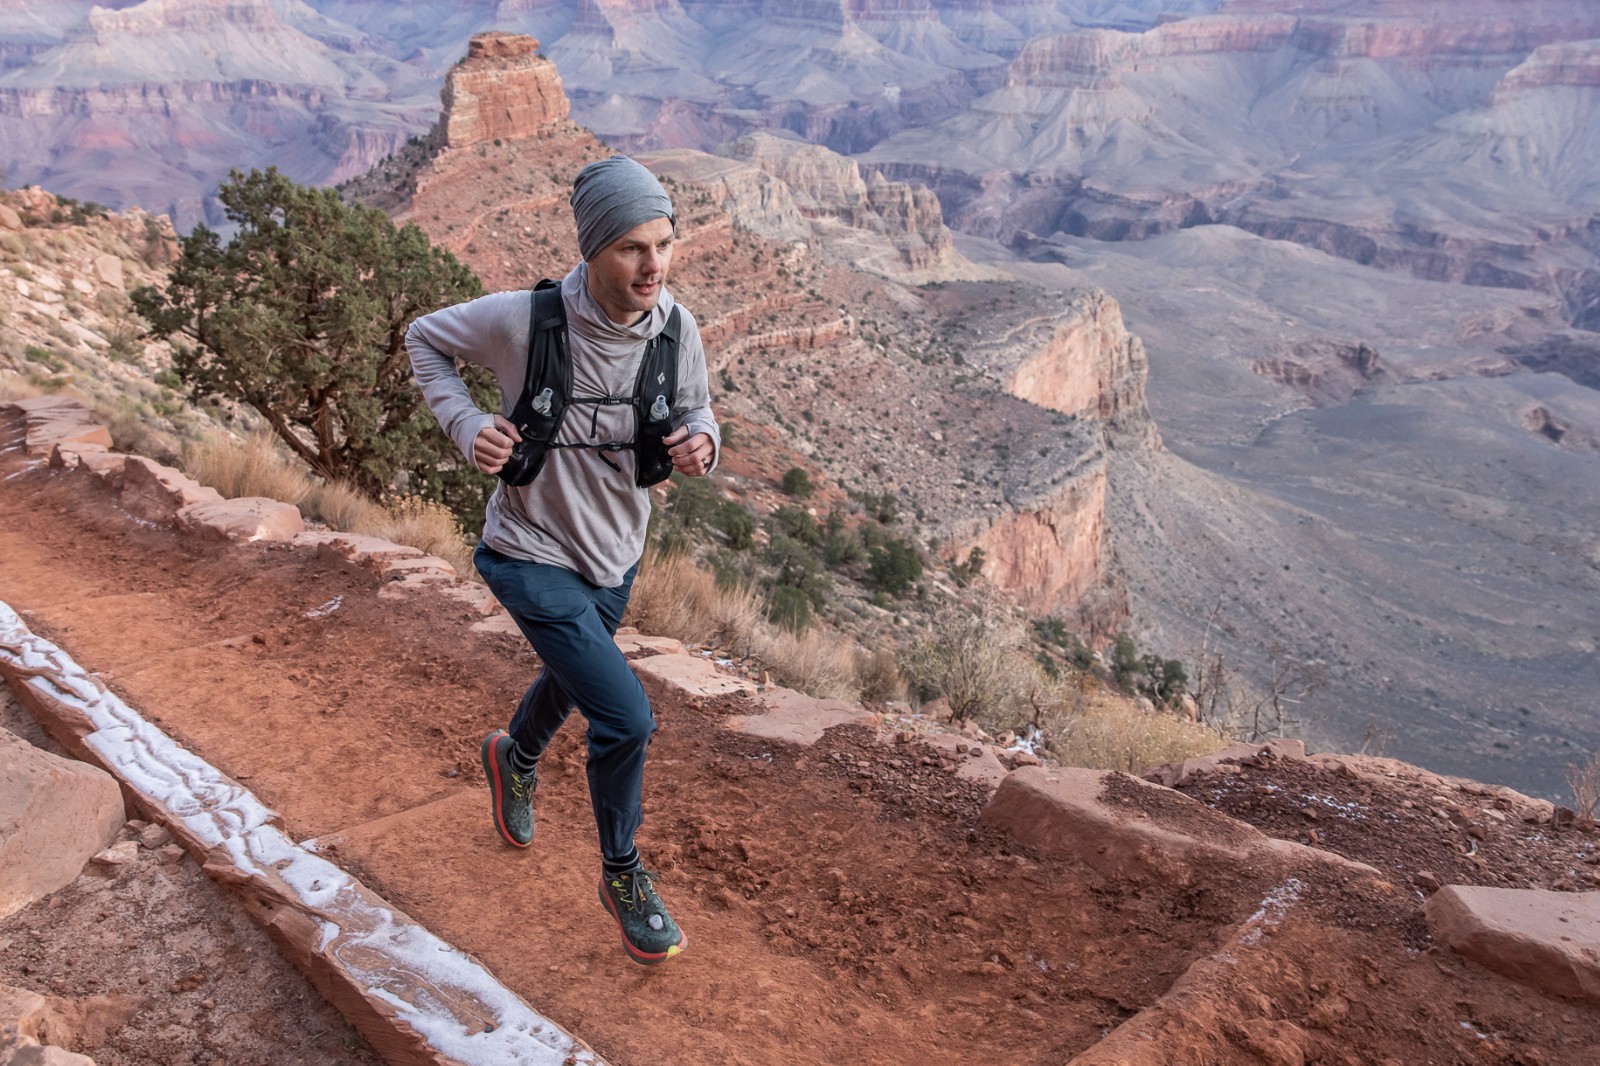 man running on dirt path above the grand canyon